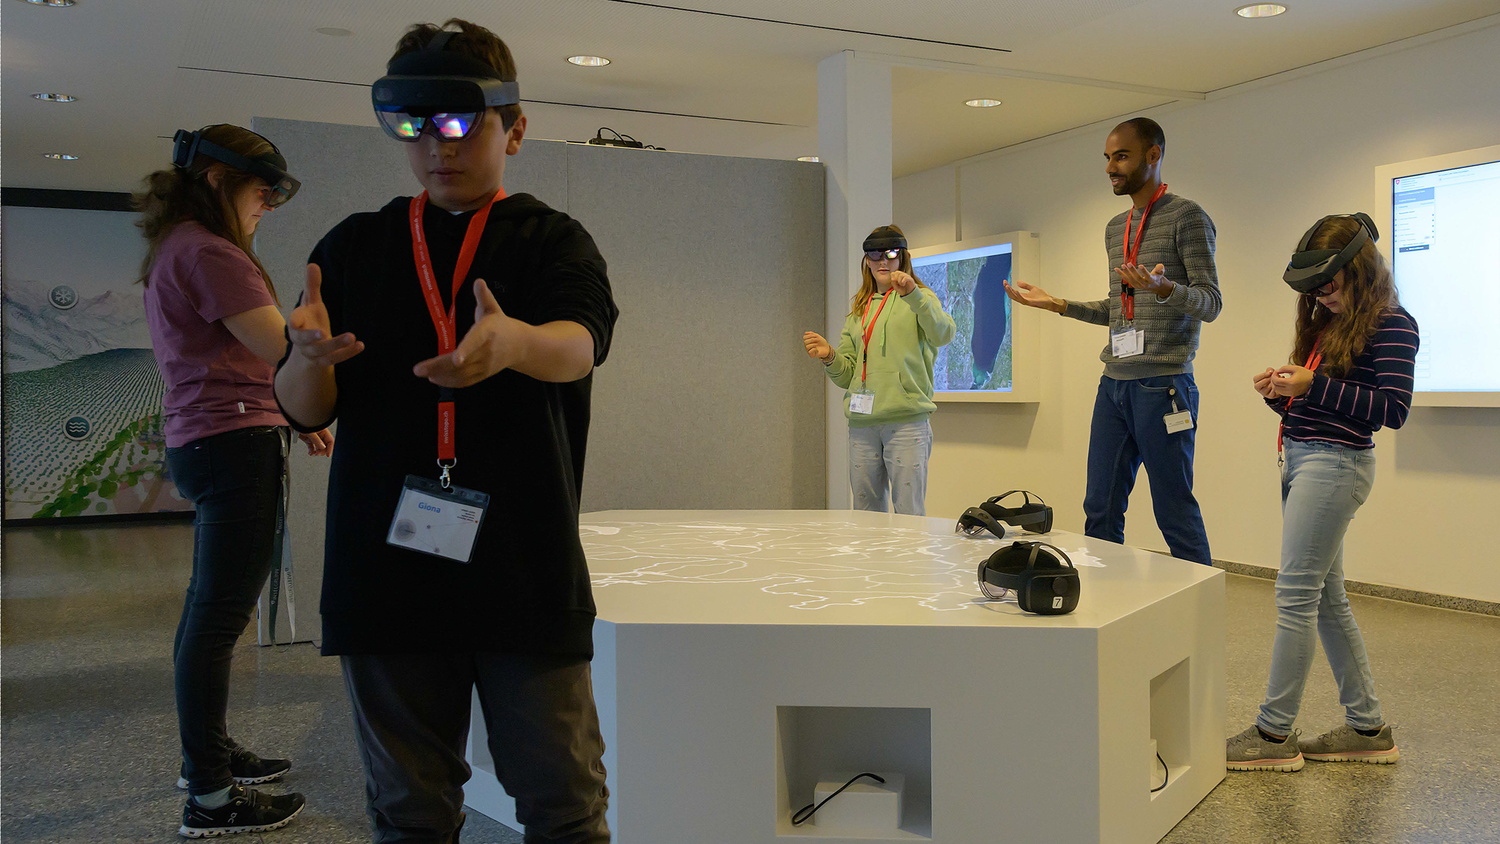 Four people with mixed reality glasses, a swisstopo employee explaining